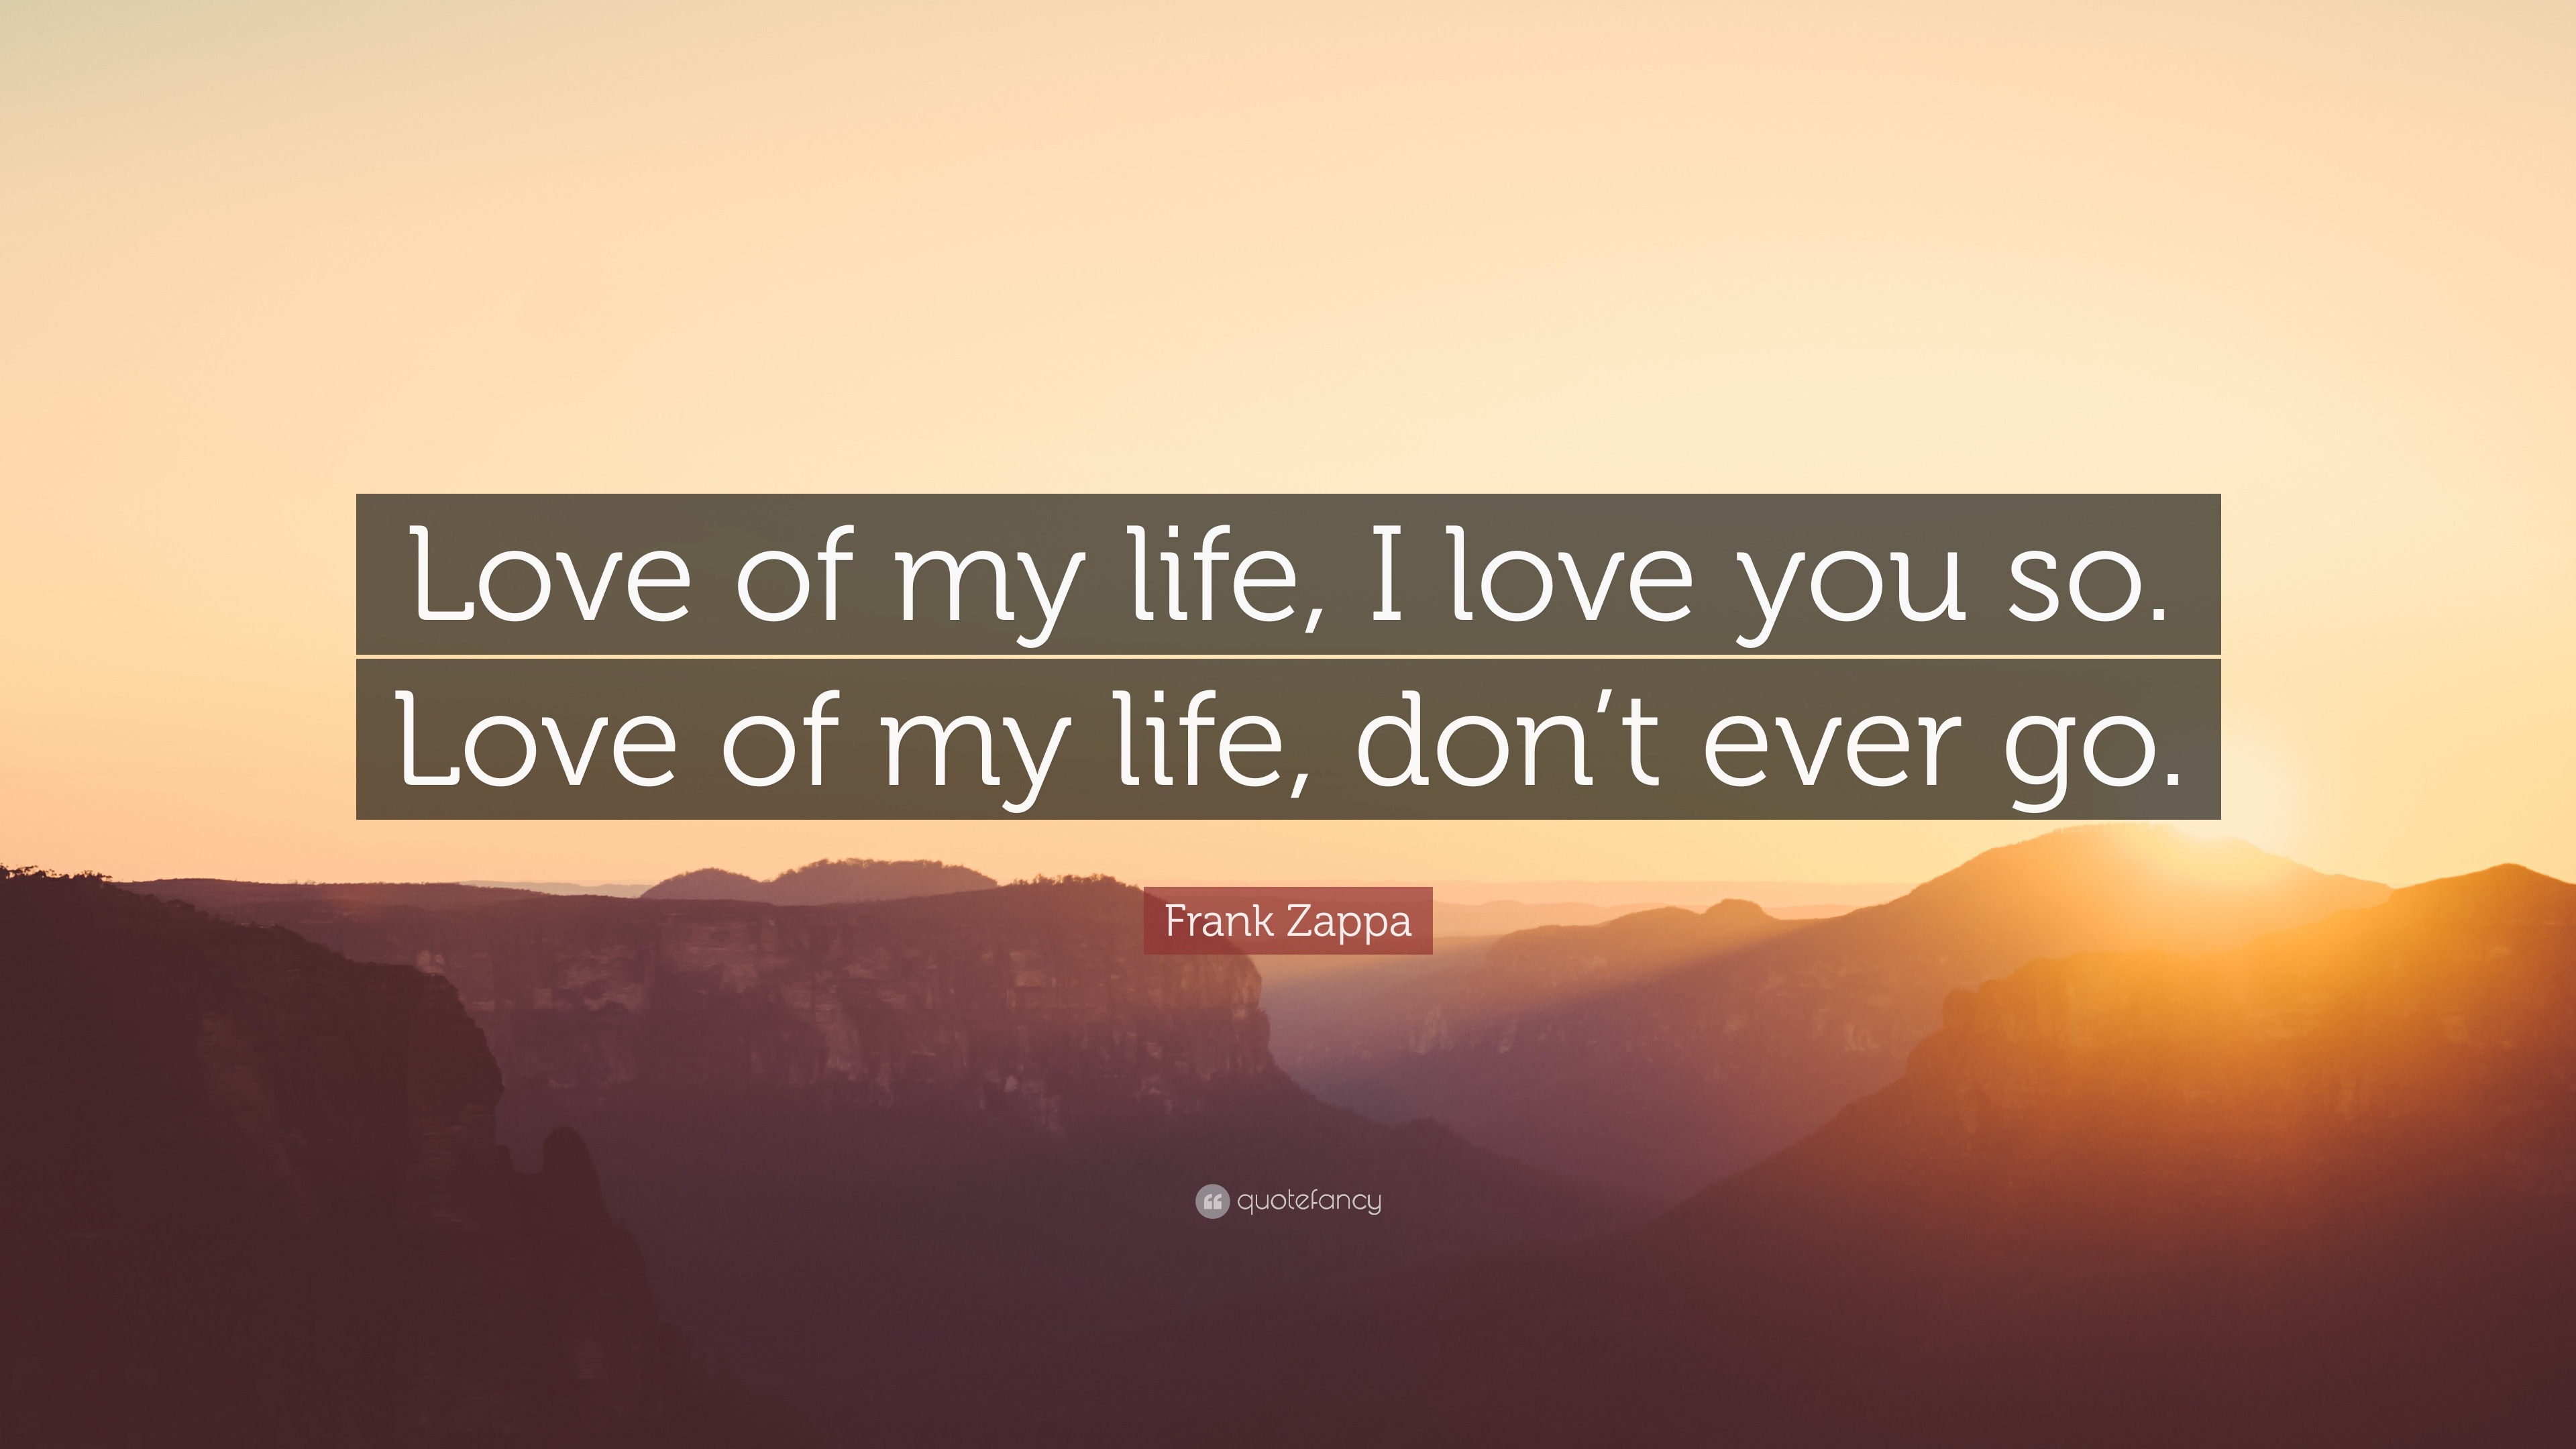 Frank Zappa Quote “Love of my life I love you so Love